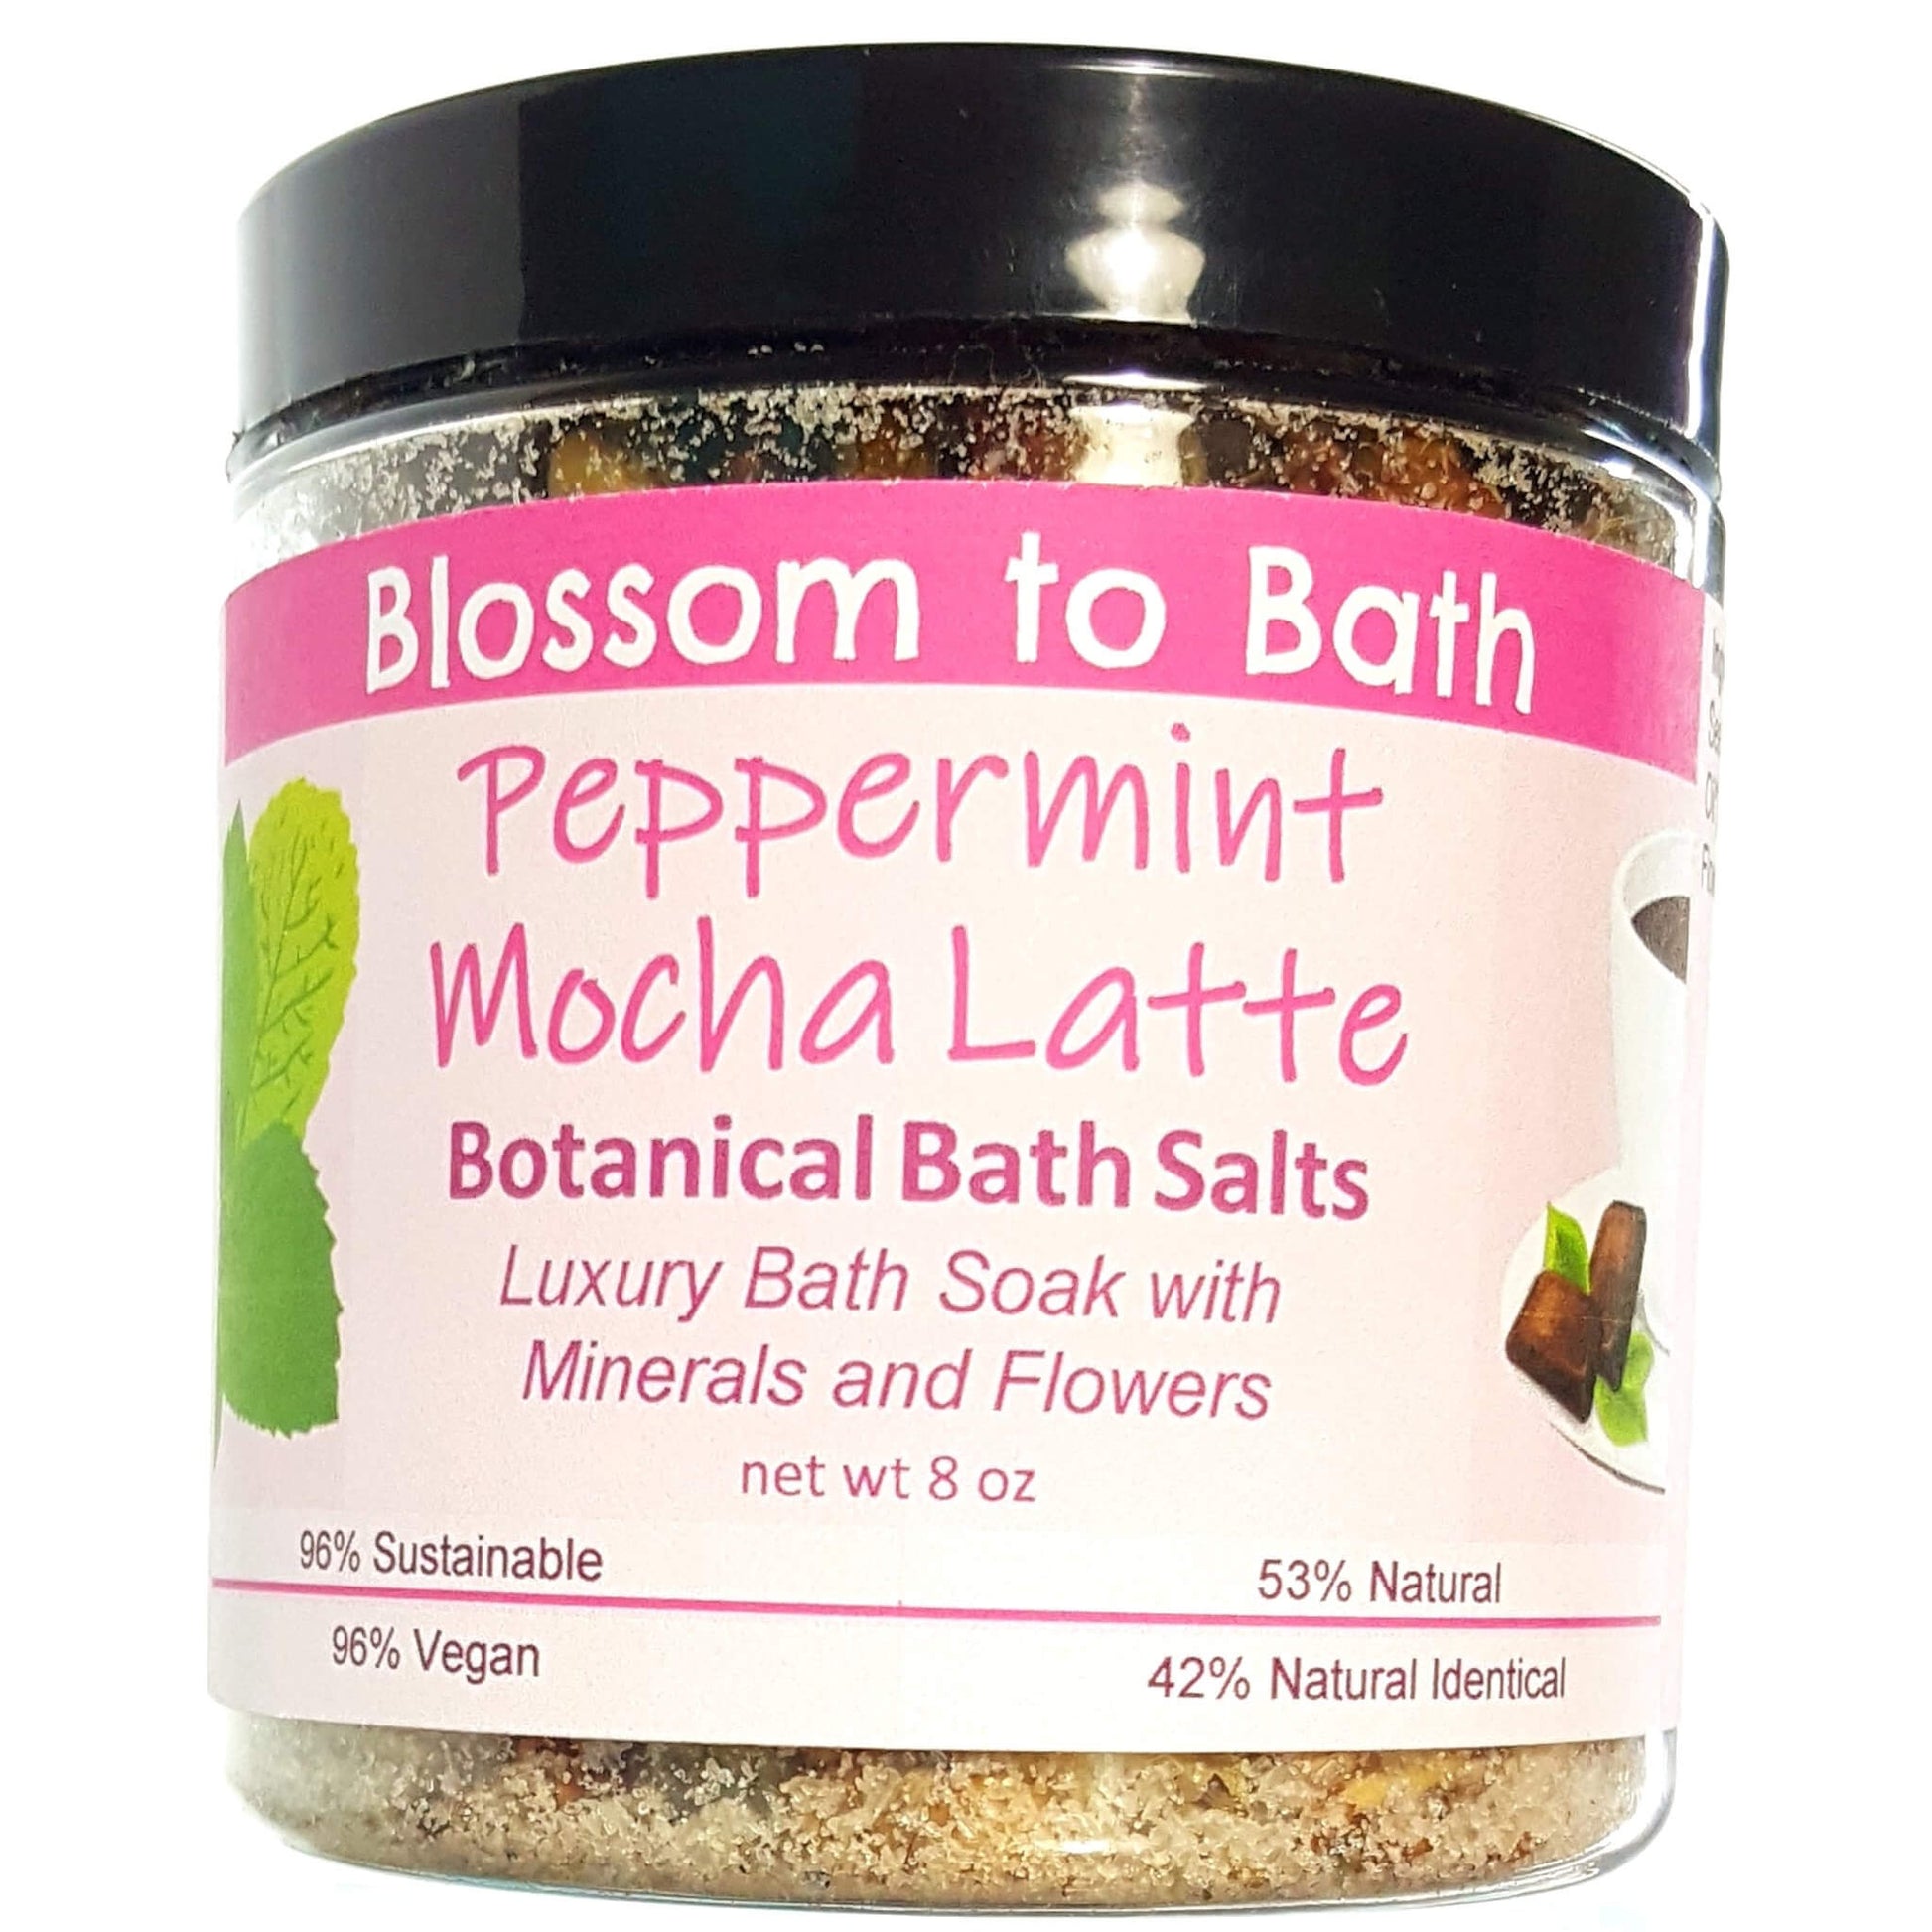 Buy Blossom to Bath Peppermint Mocha Latte Botanical Bath Salts from Flowersong Soap Studio.  A hand selected variety of skin loving botanicals and mineral rich salts for a unique, luxurious soaking experience  A confectionary blend of fresh mint, rich fudge, and coffee.